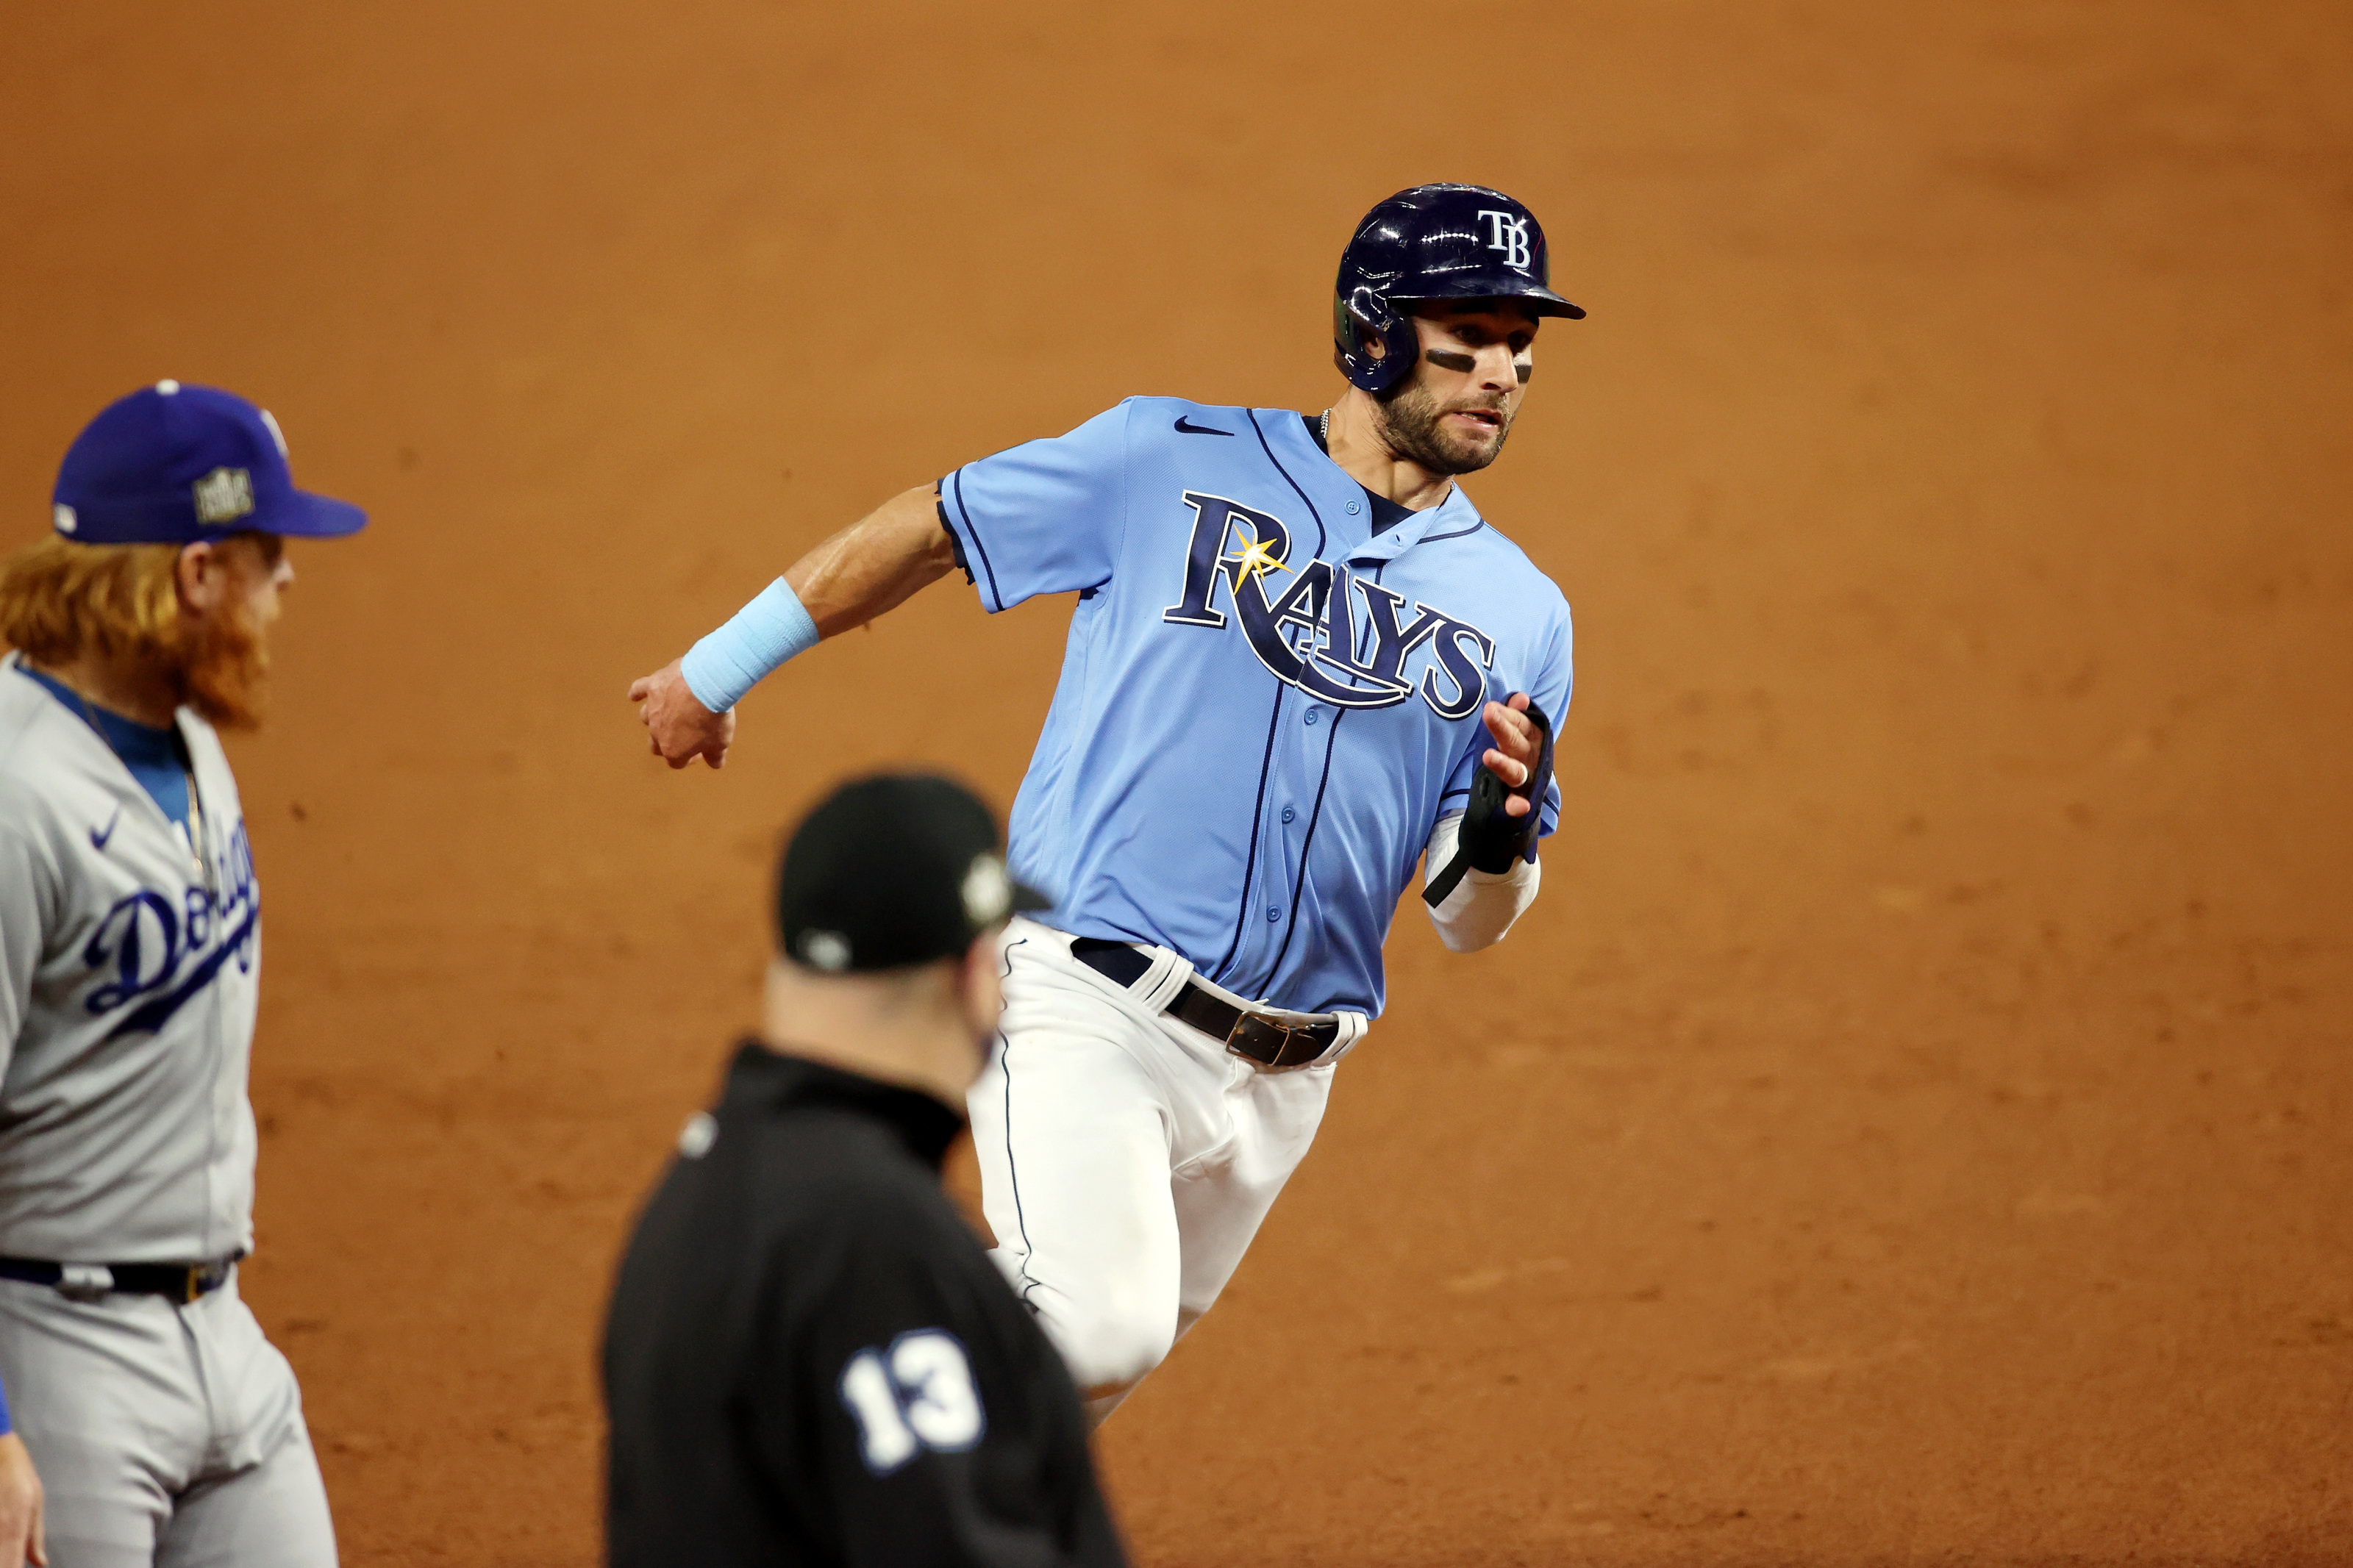 Why Tampa Bay Rays fans ought to be happy, not dis-spirited